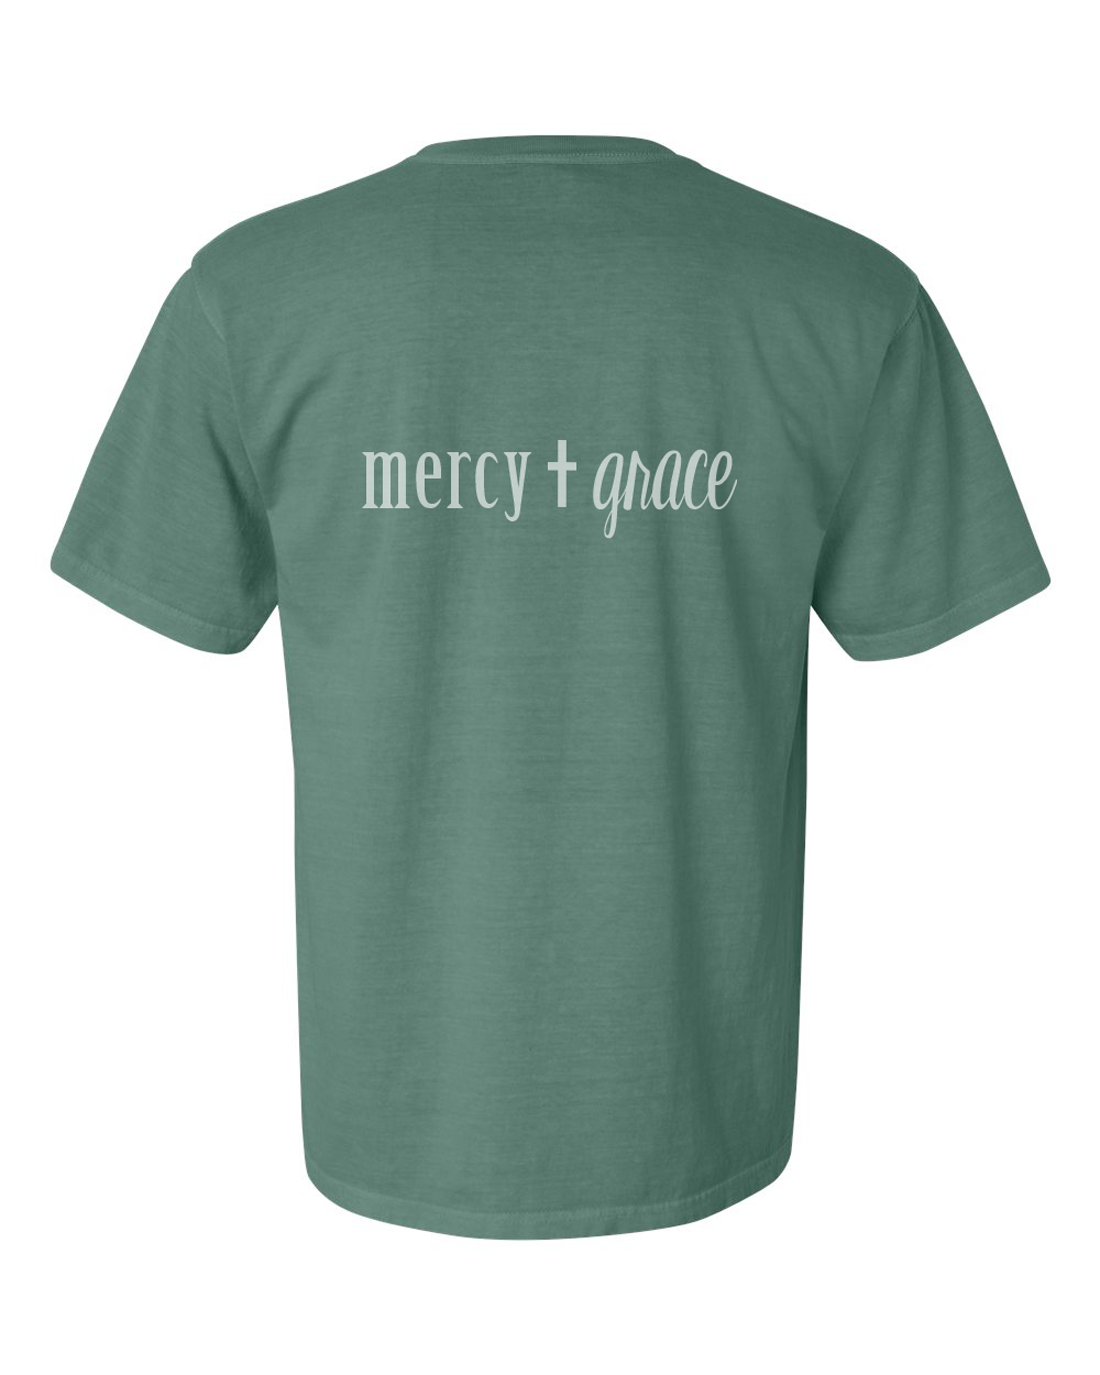 i am saved Message of Mercy  T-Shirt